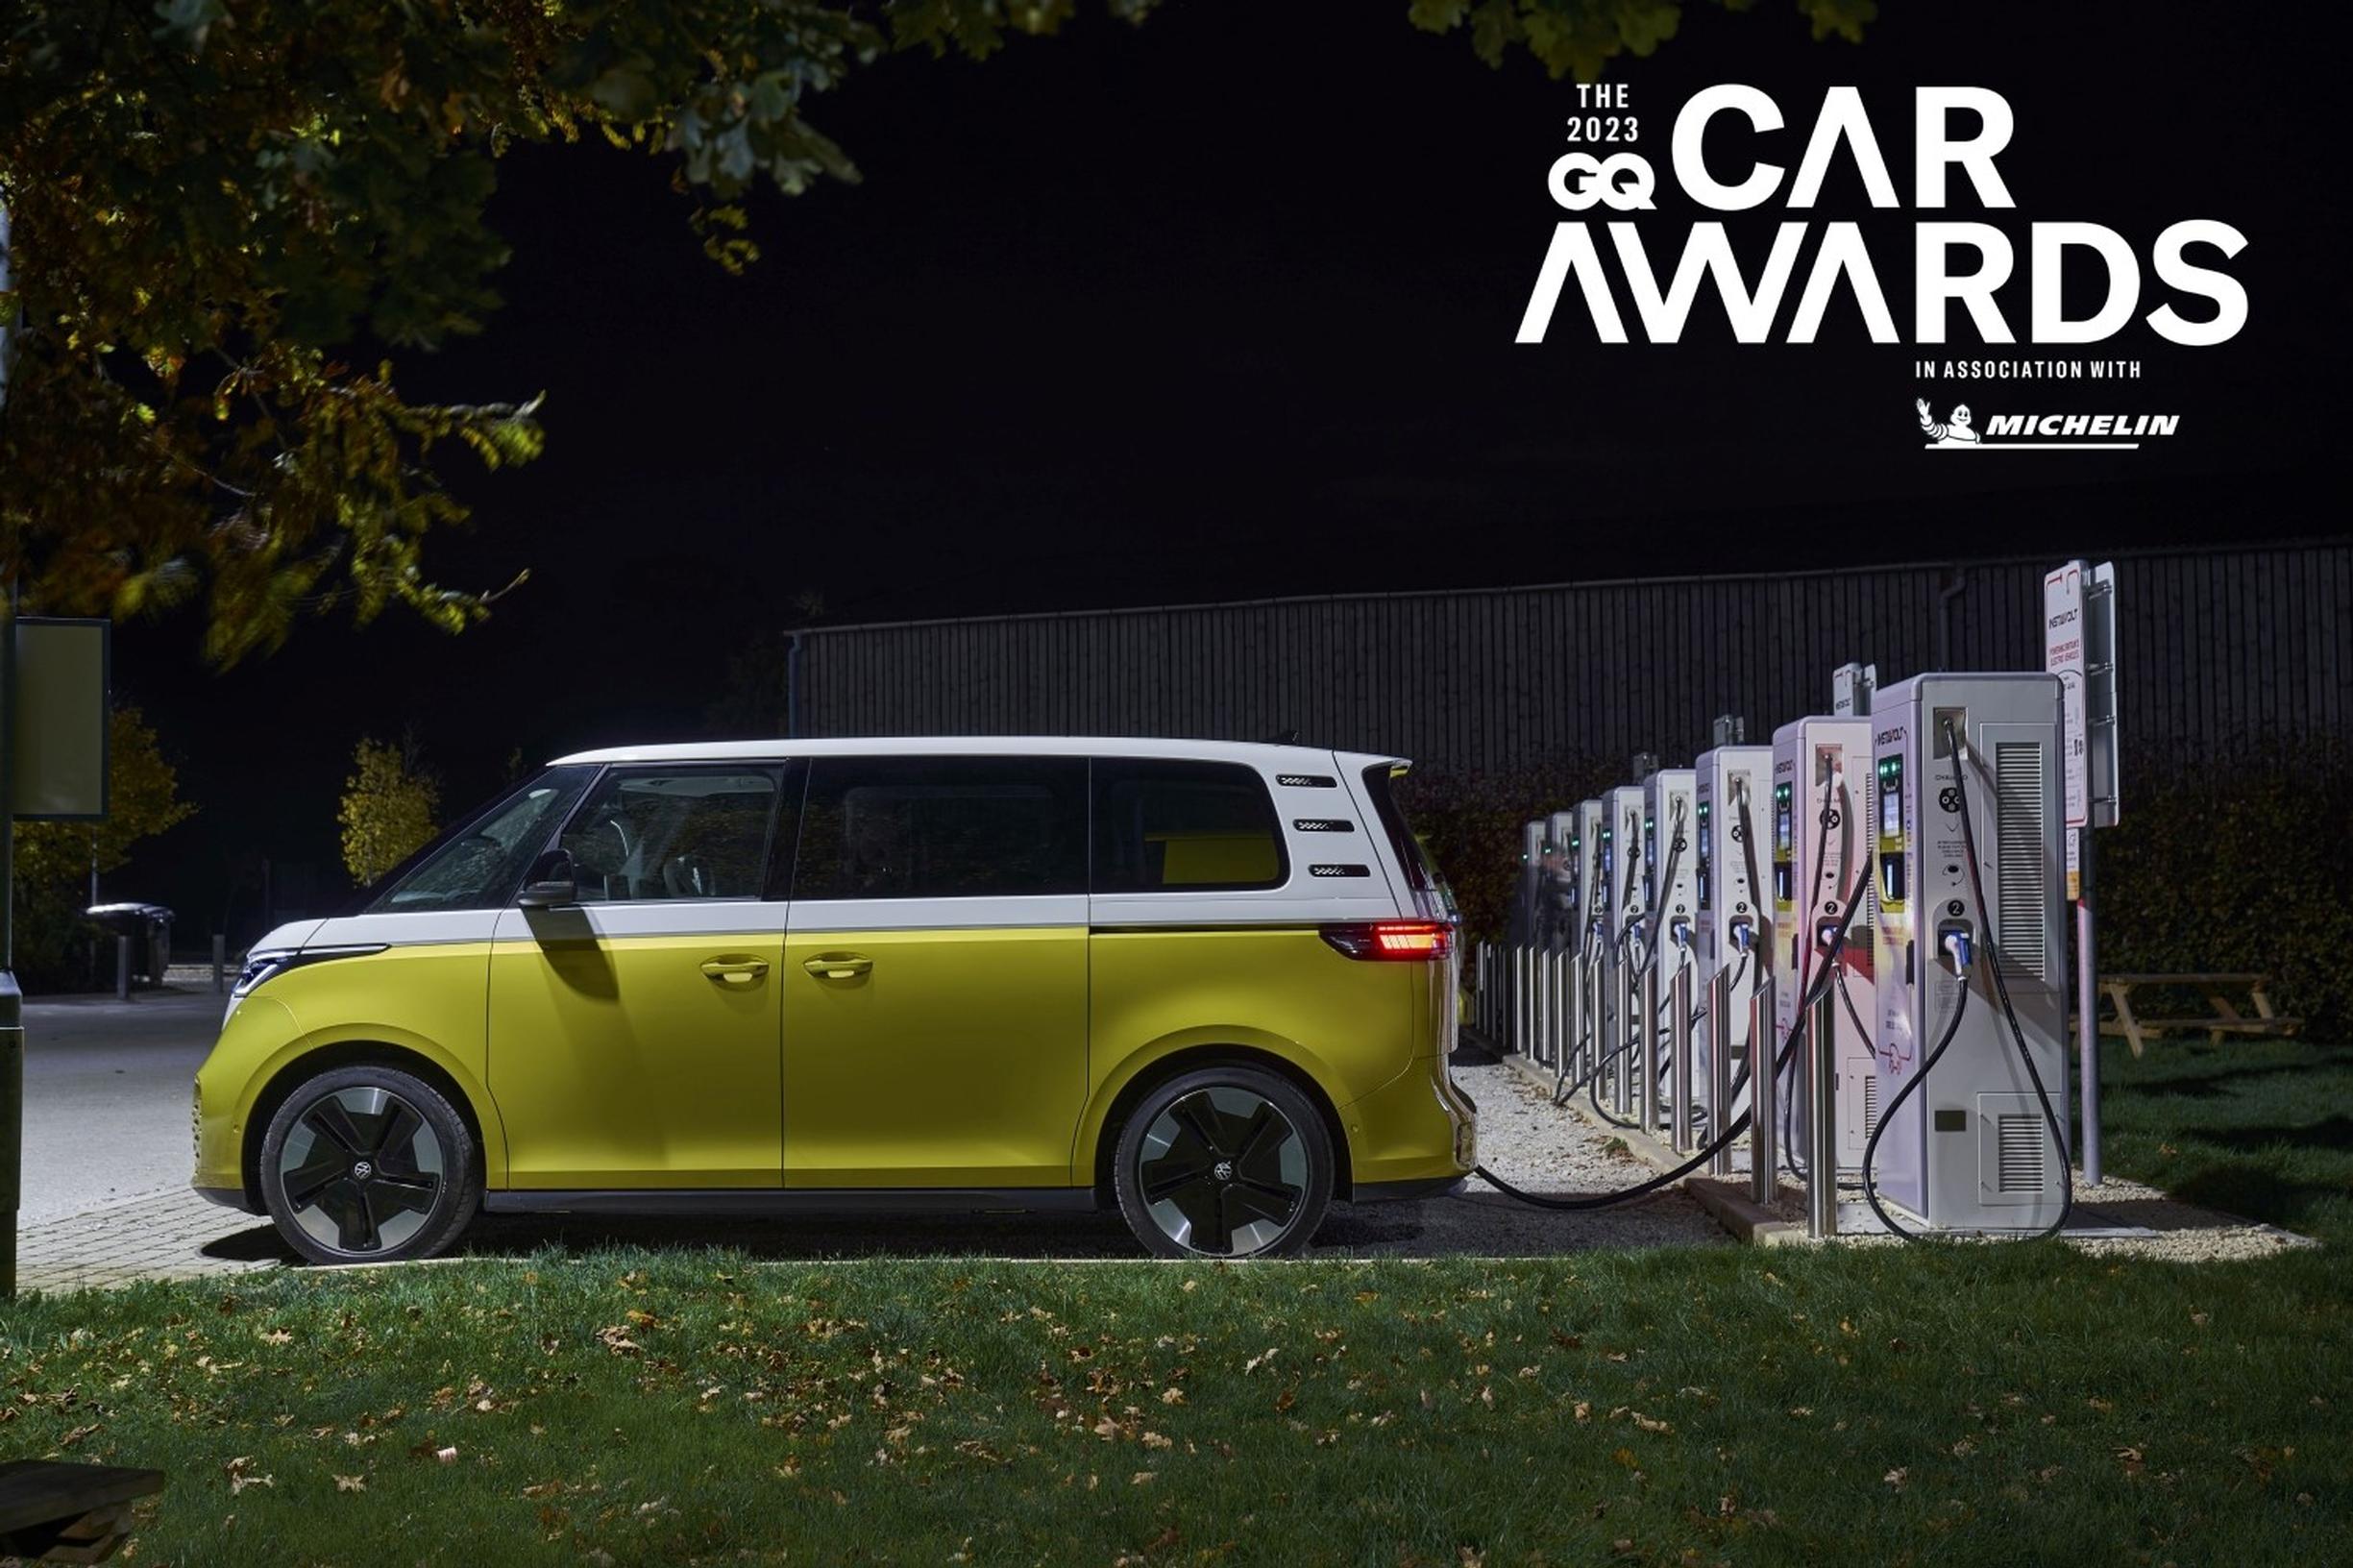 Volkswagen ID. Buzz named Icon of the Year at the 2023 GQ Car Awards